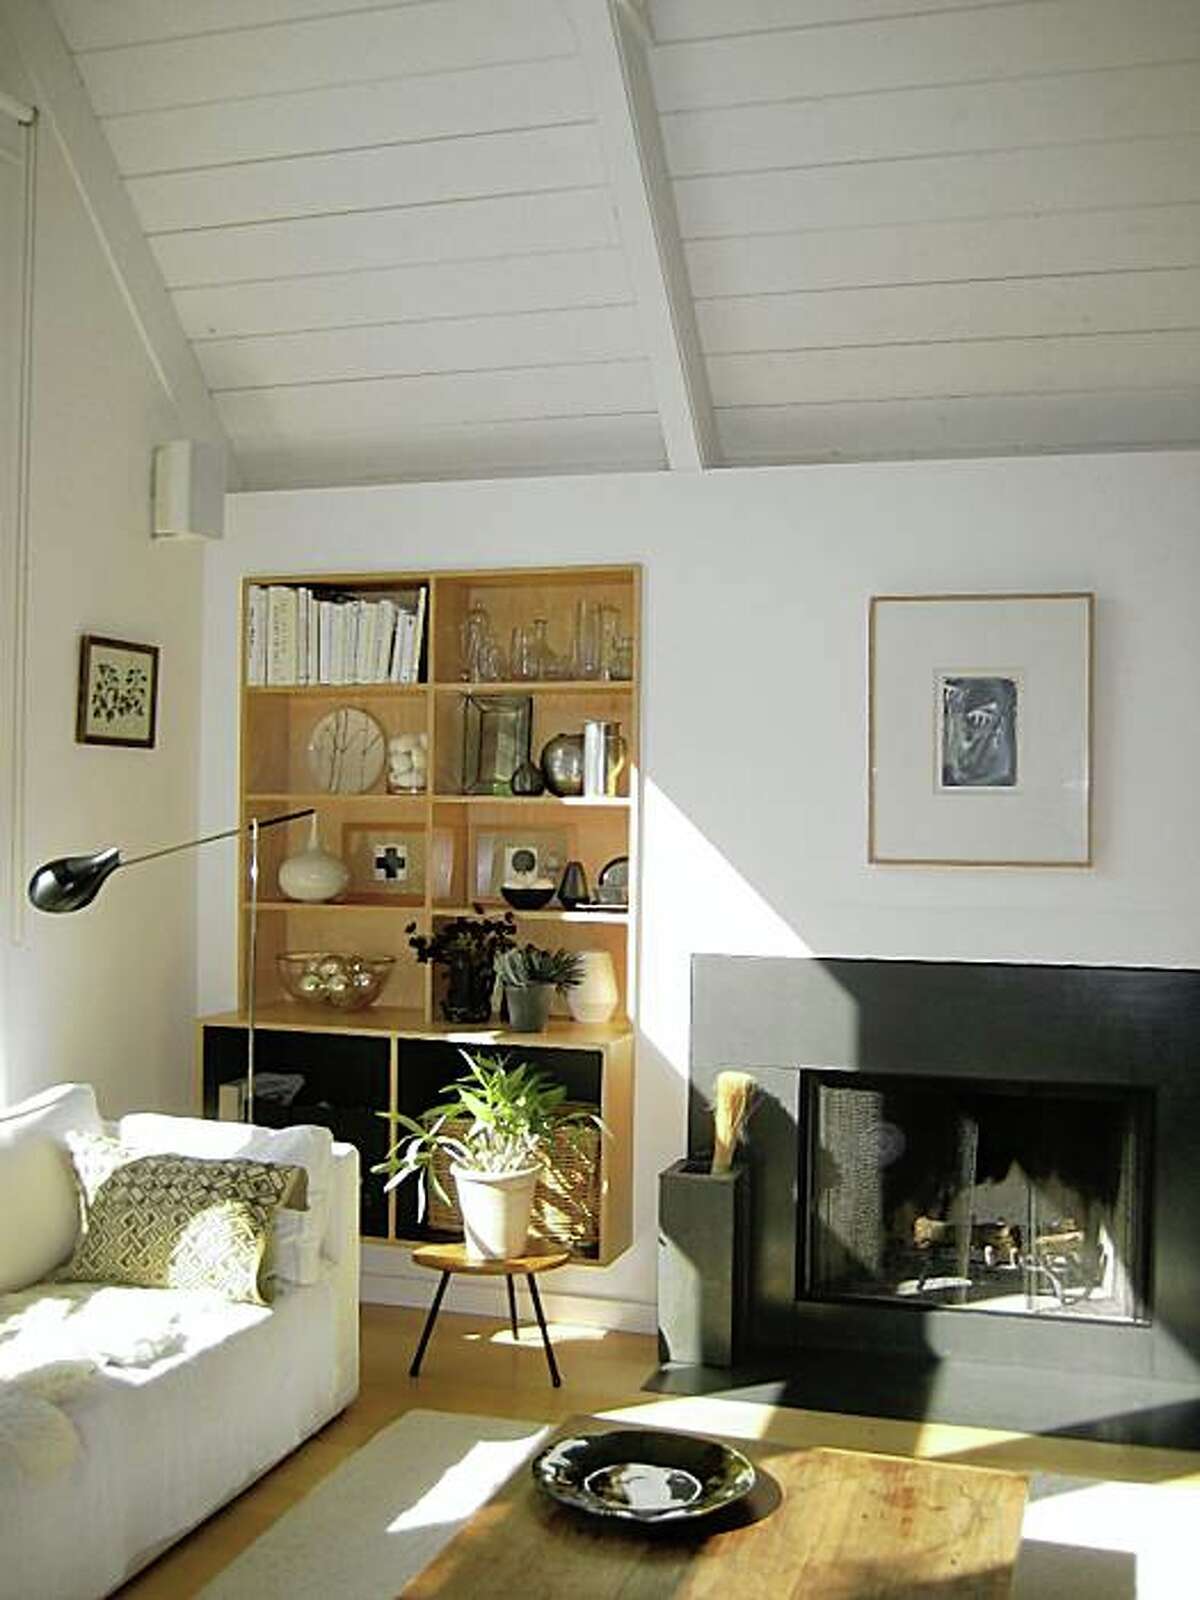 Julie Carlson's Mill Valley living room, architecture by Jerome Buttrick.